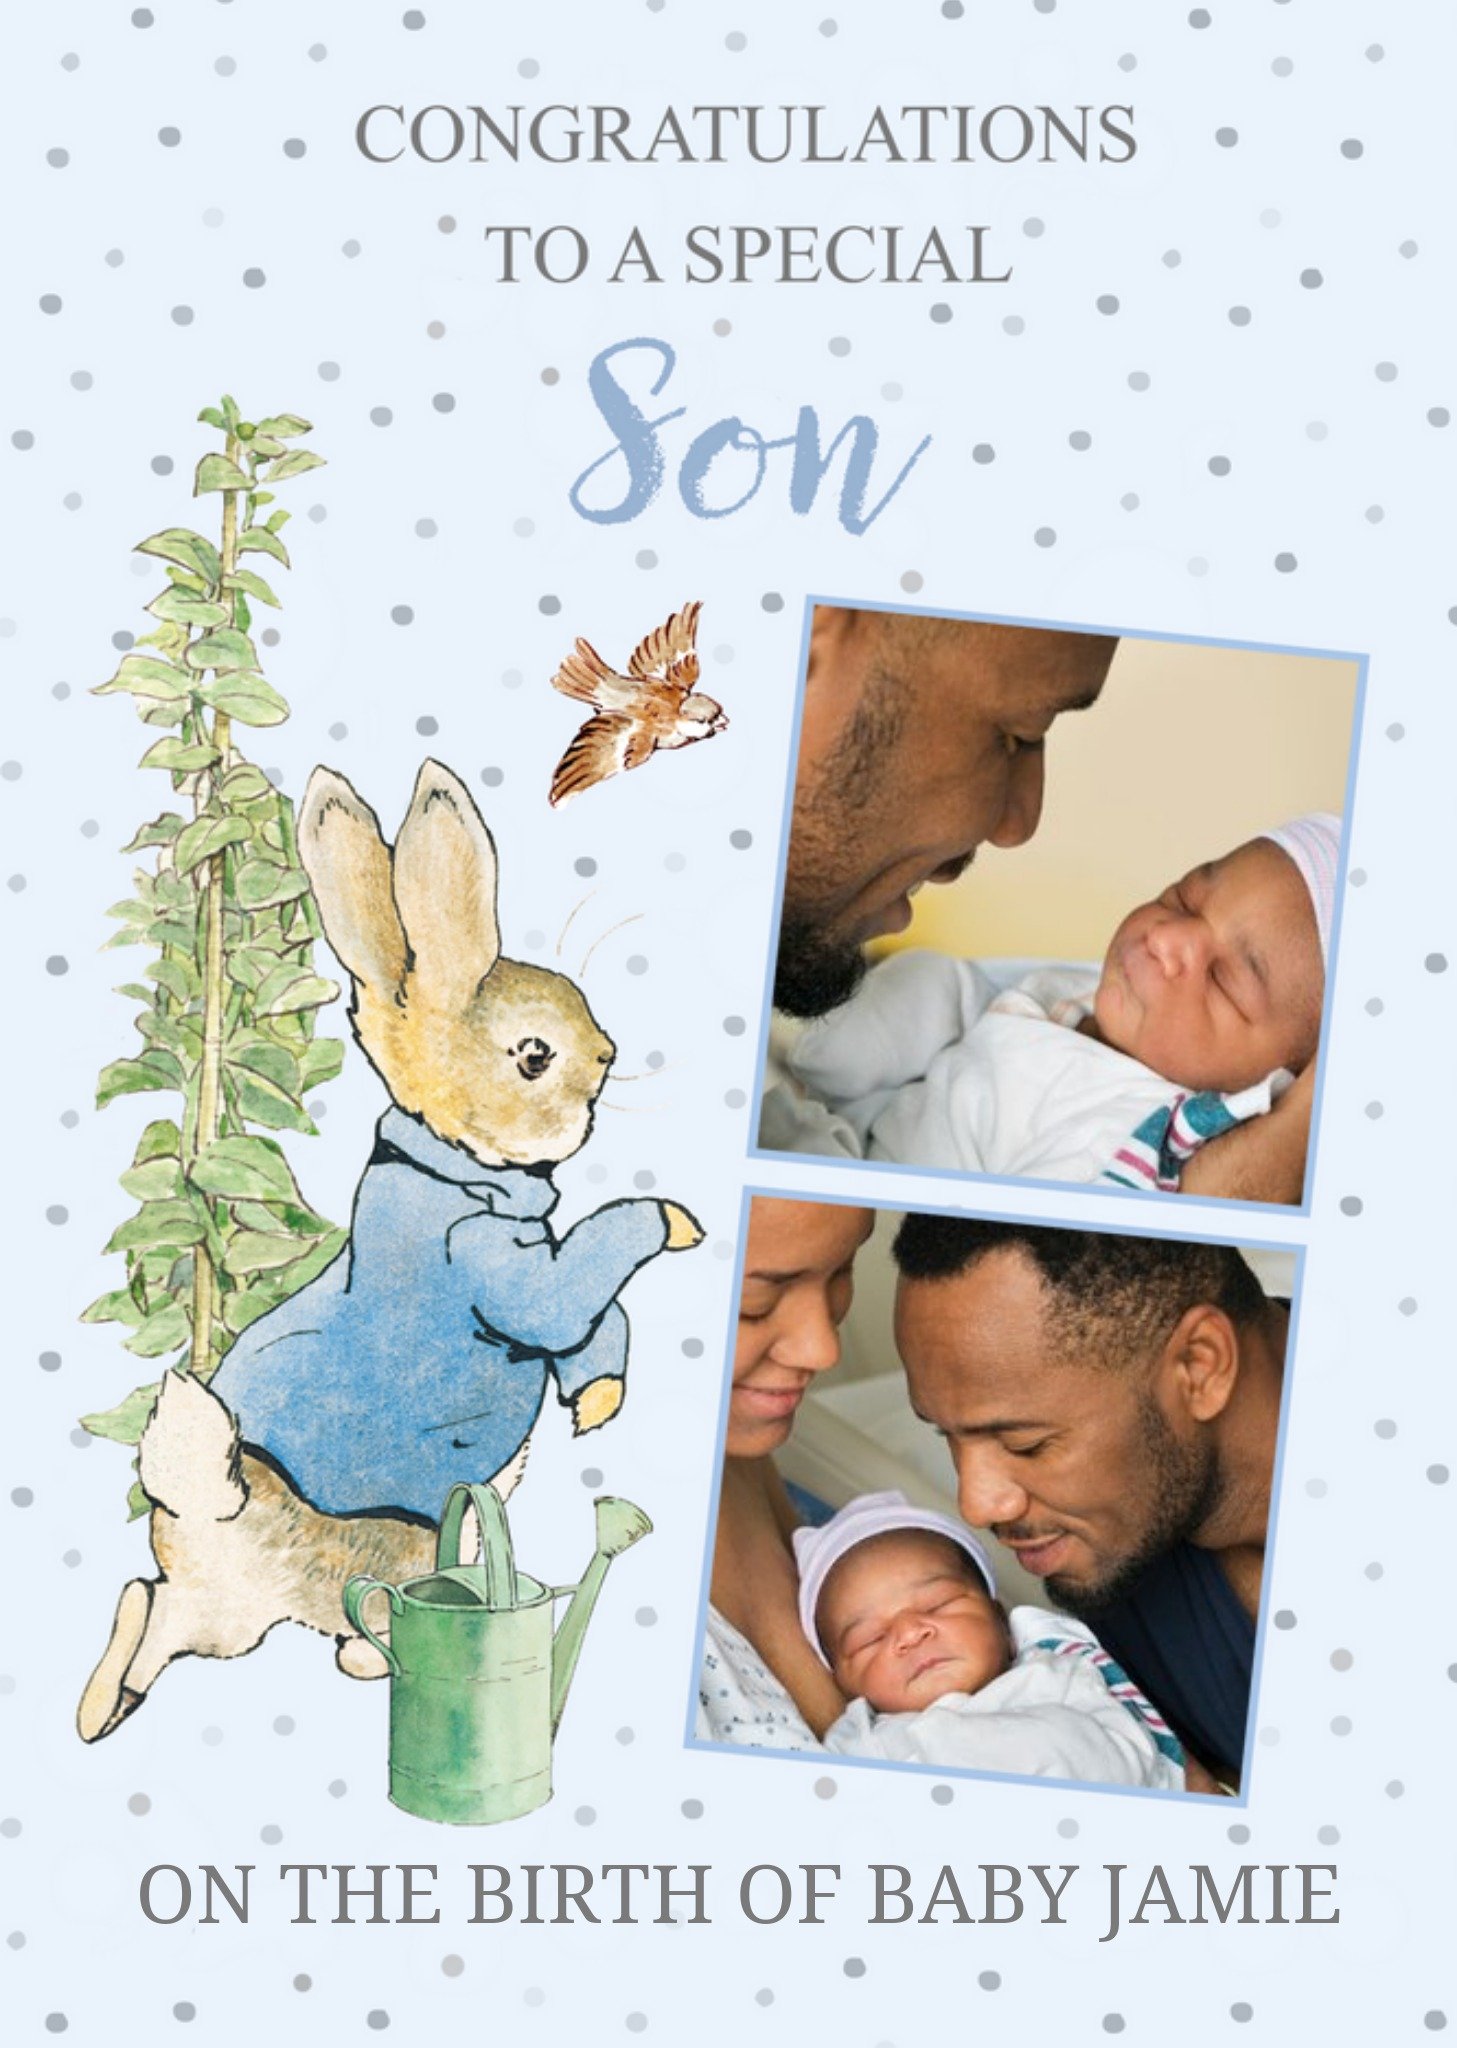 Peter Rabbit Congratulations To A Special Son Photo Upload New Baby Card Ecard